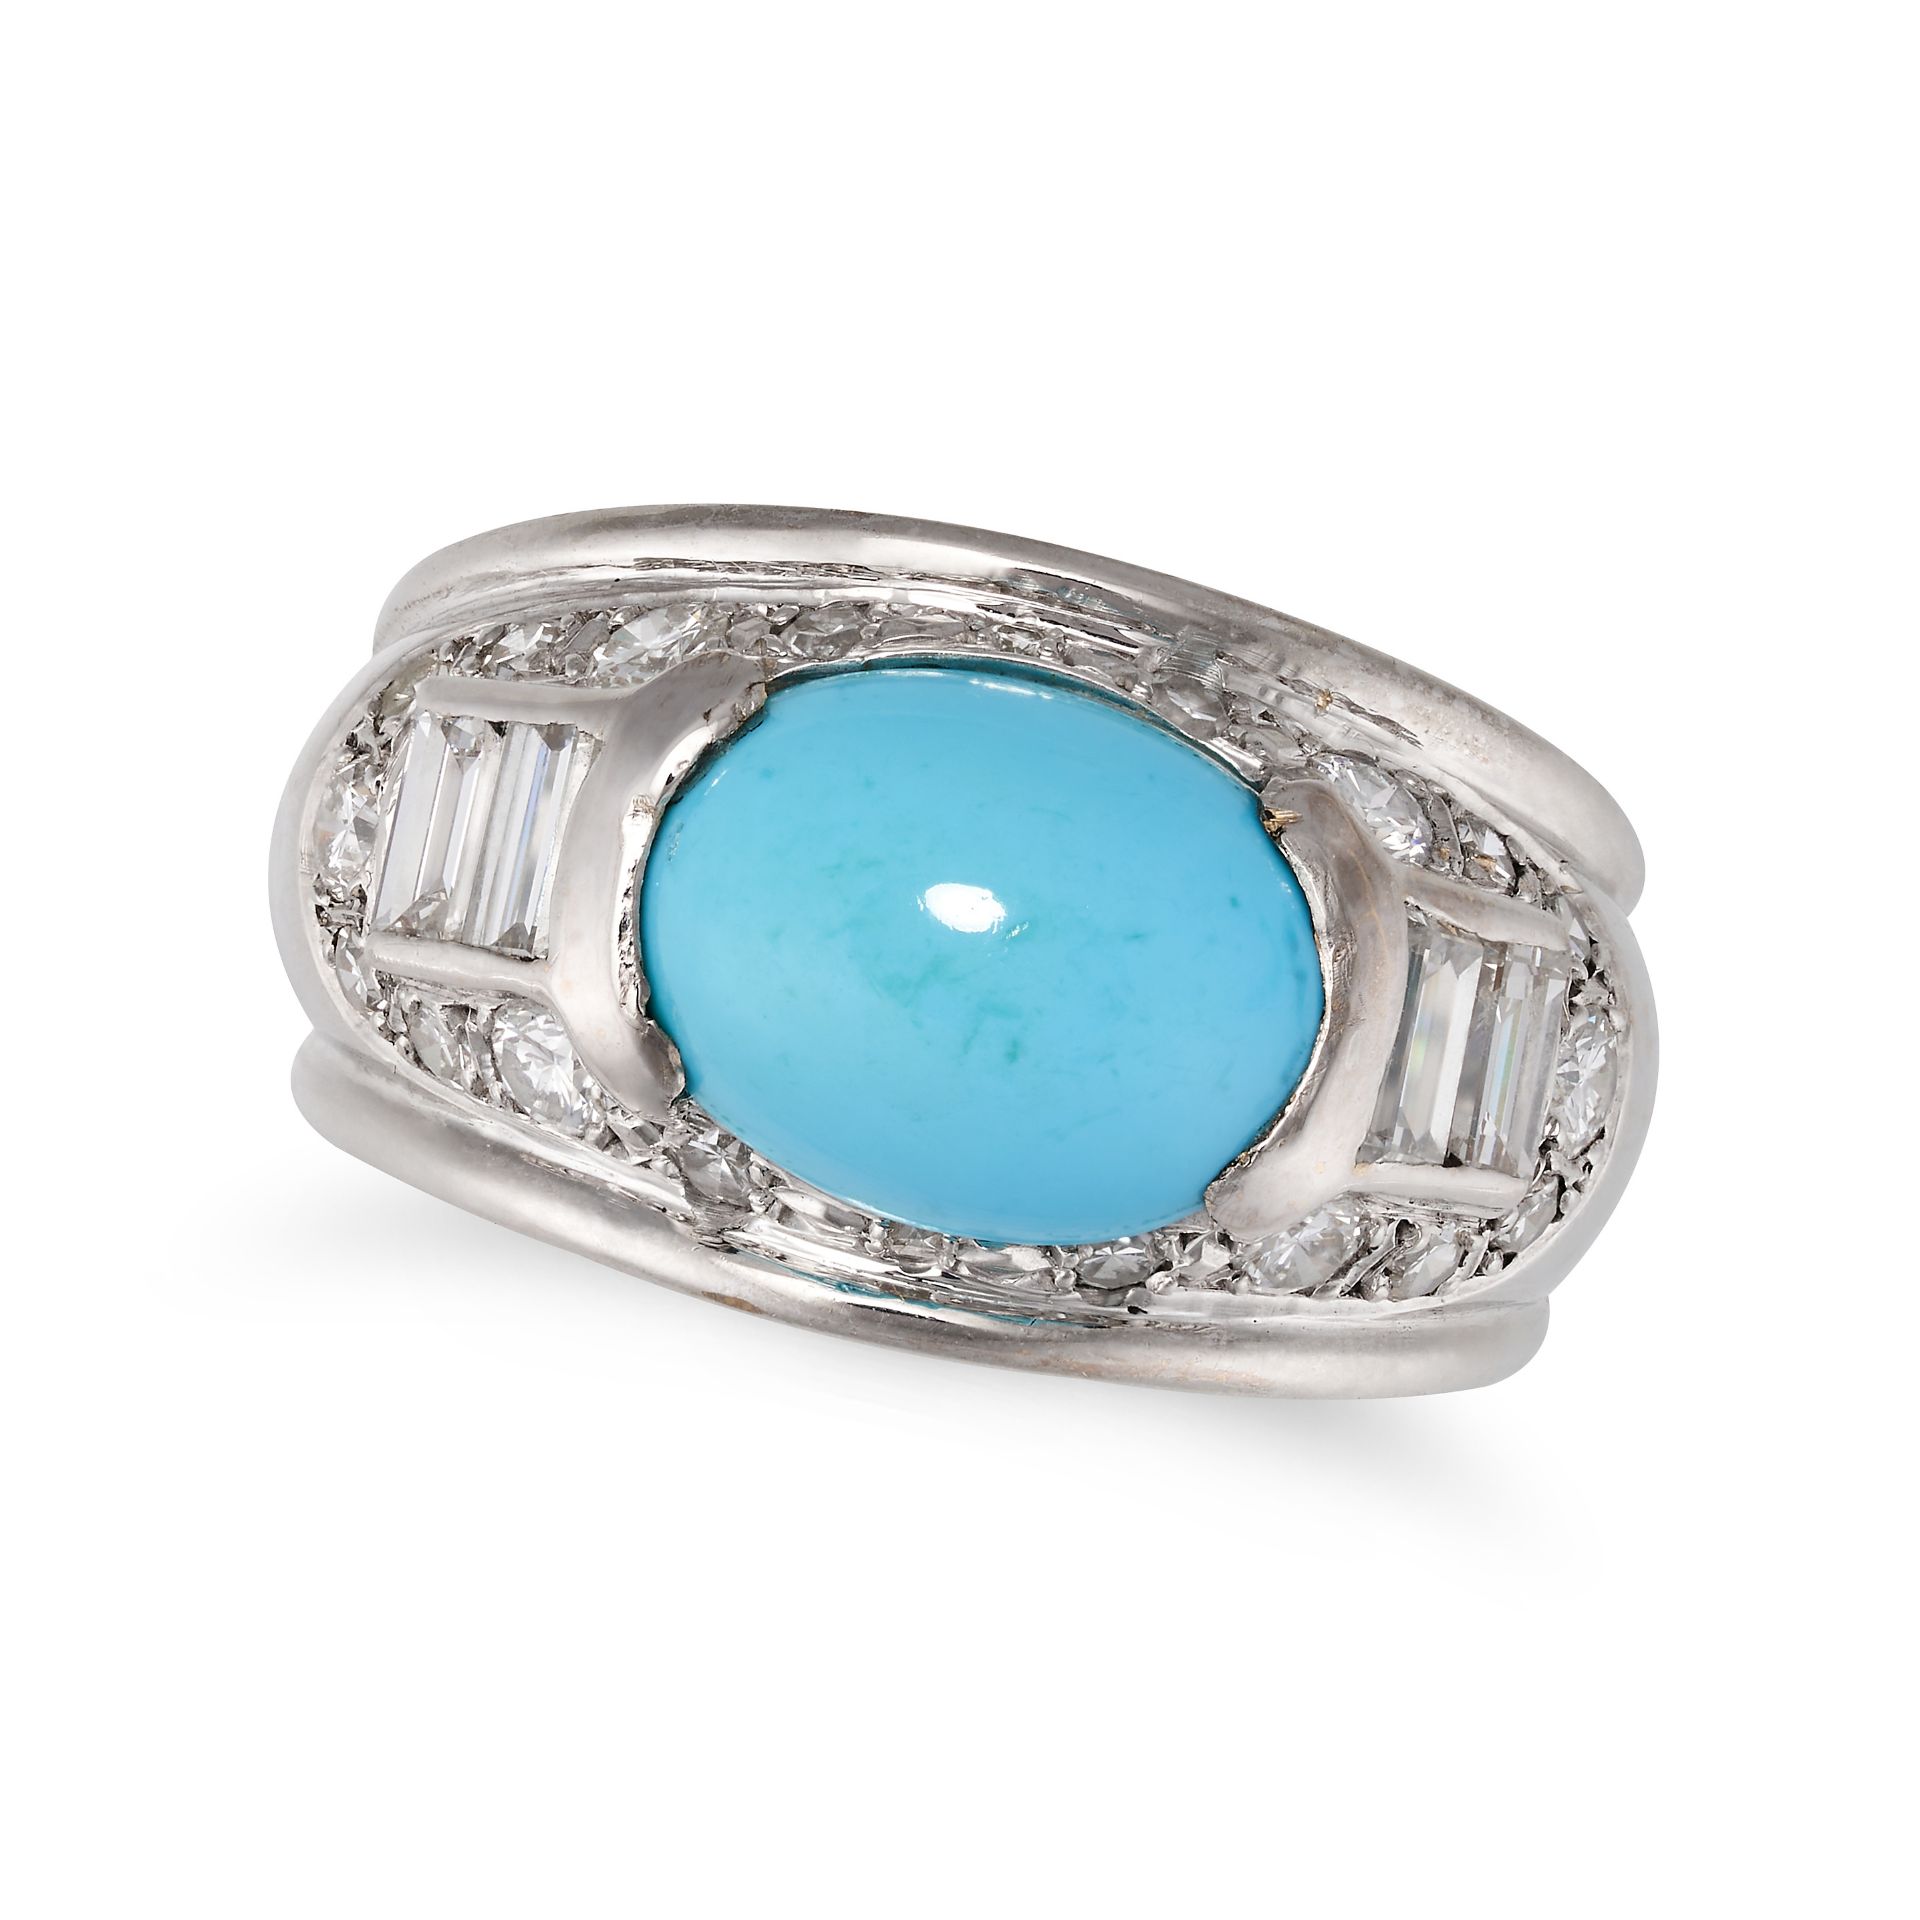 NO RESERVE - A TURQUOISE AND DIAMOND RING in 18ct white gold, set with an oval cabochon turquoise...